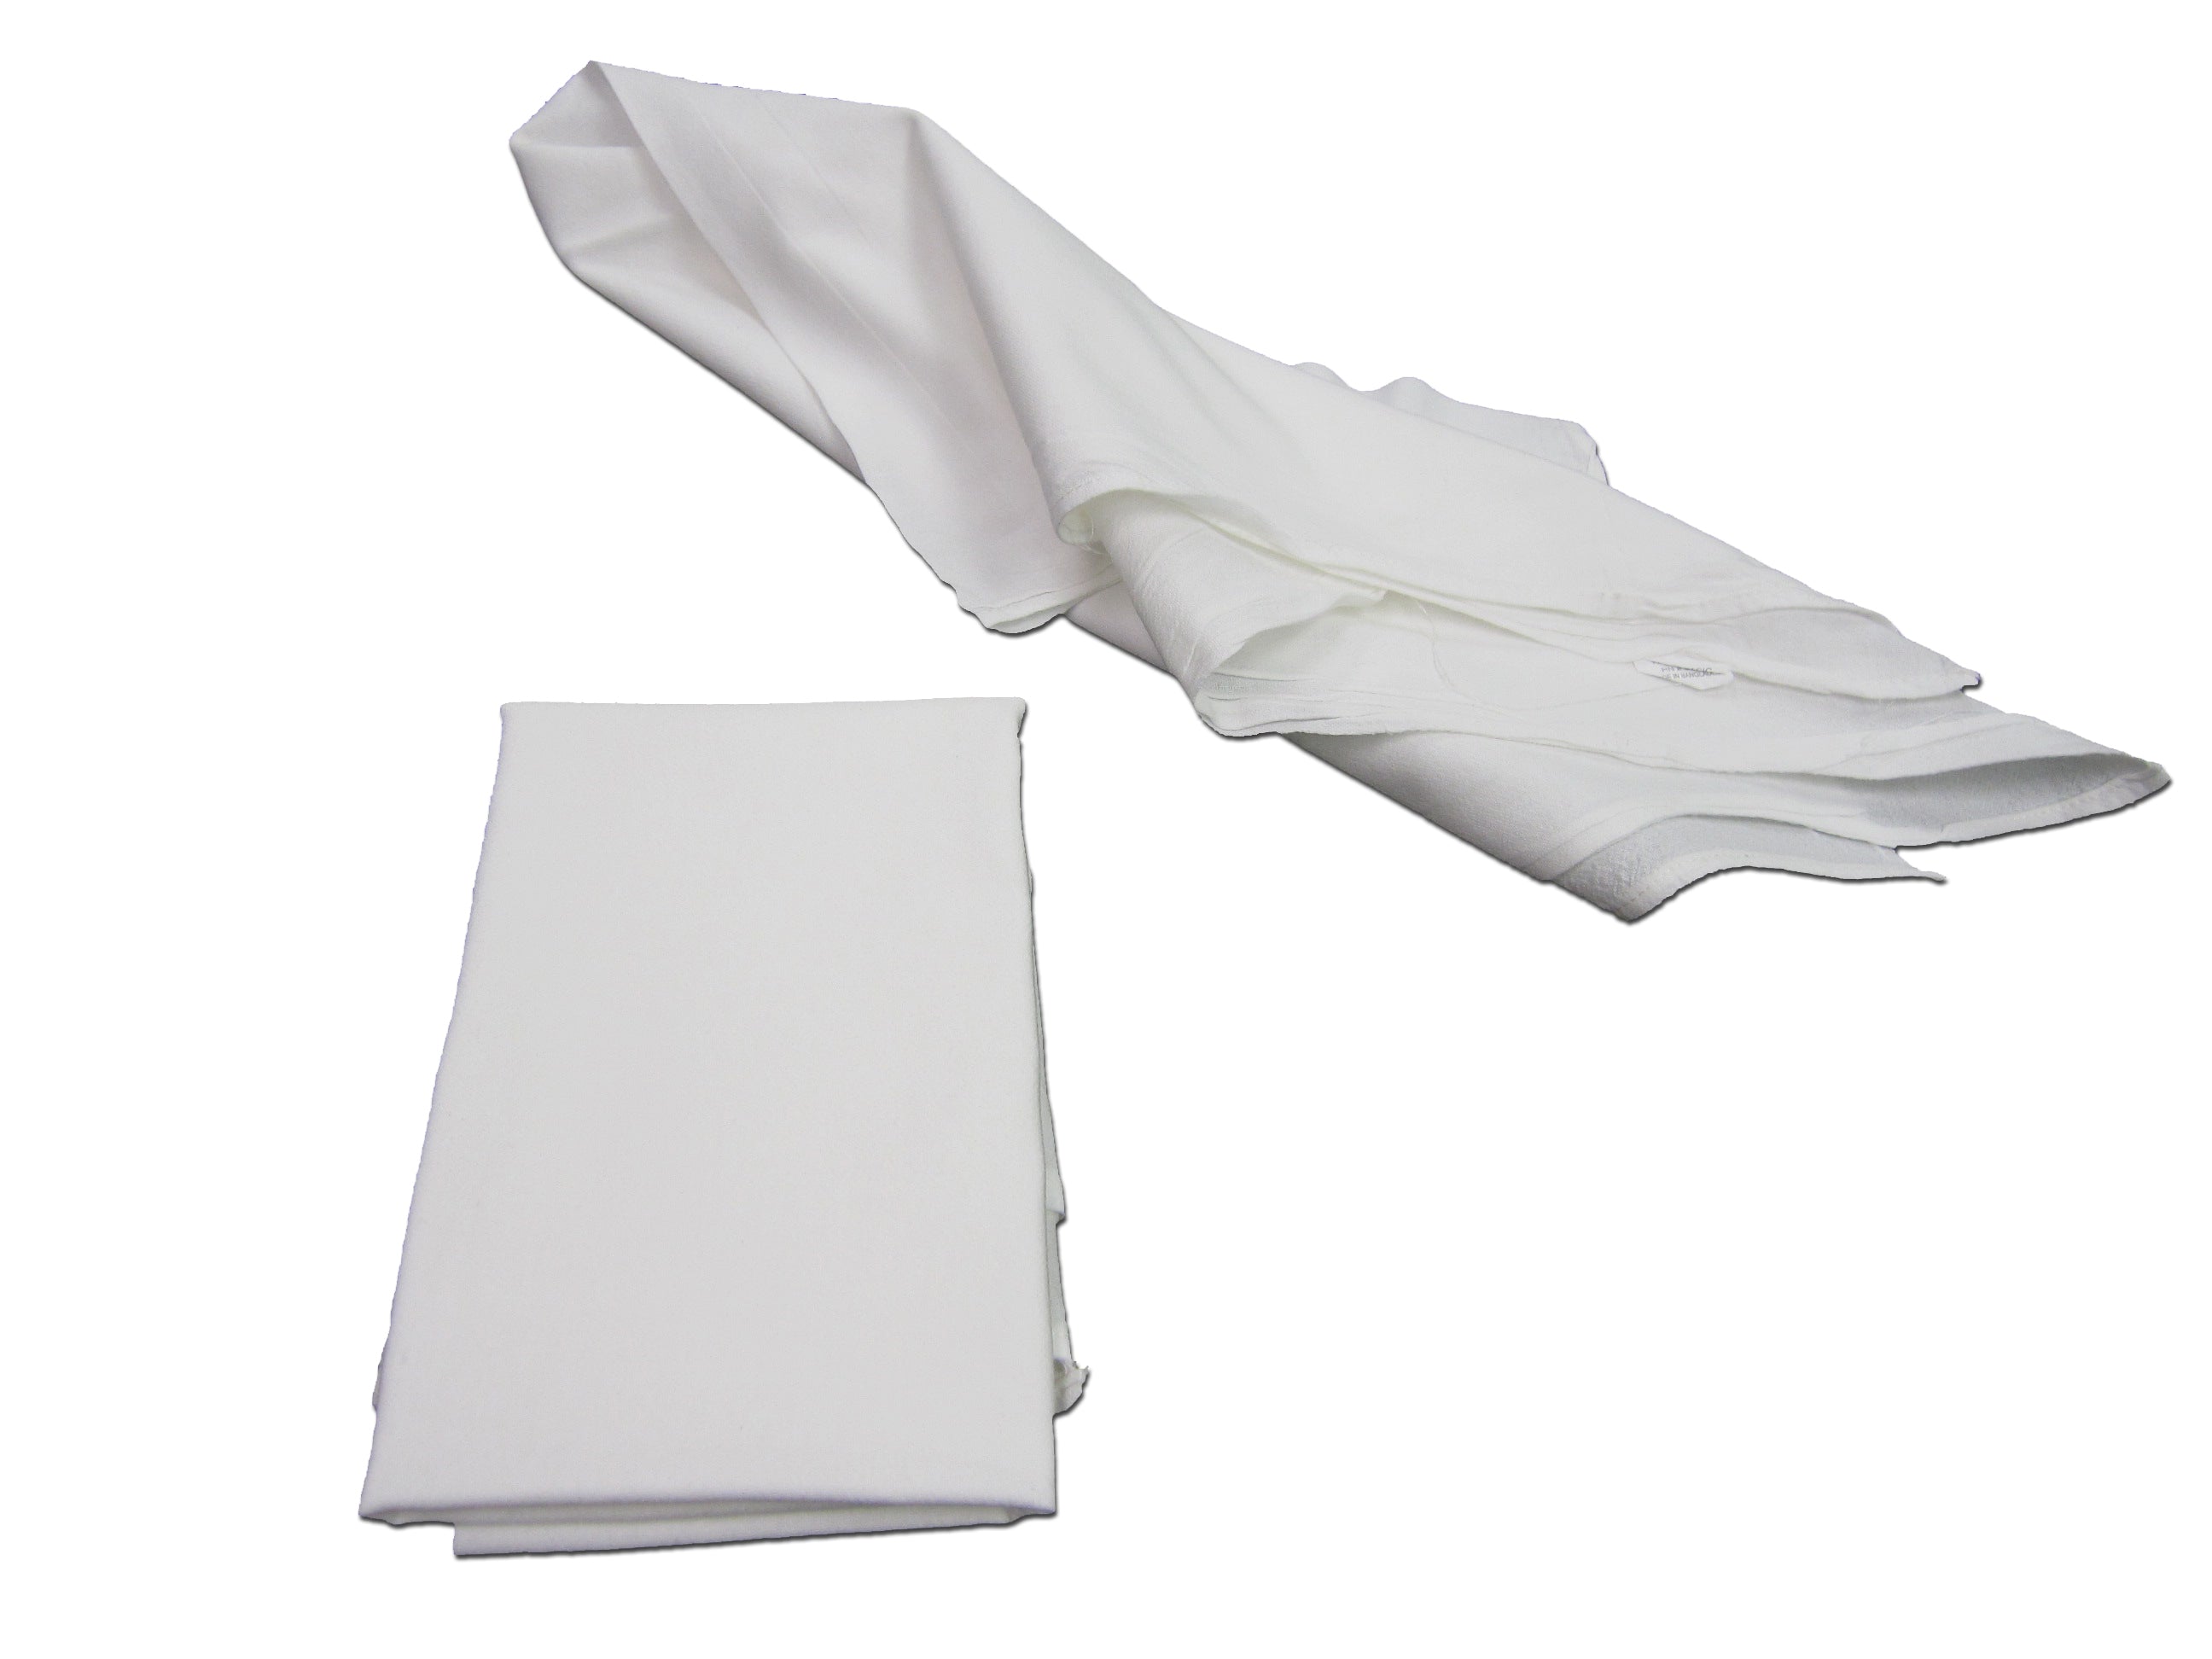 Pro-Clean Basics: Sanitized Anti-Bacterial White Wiping Towel, 15in x 25in